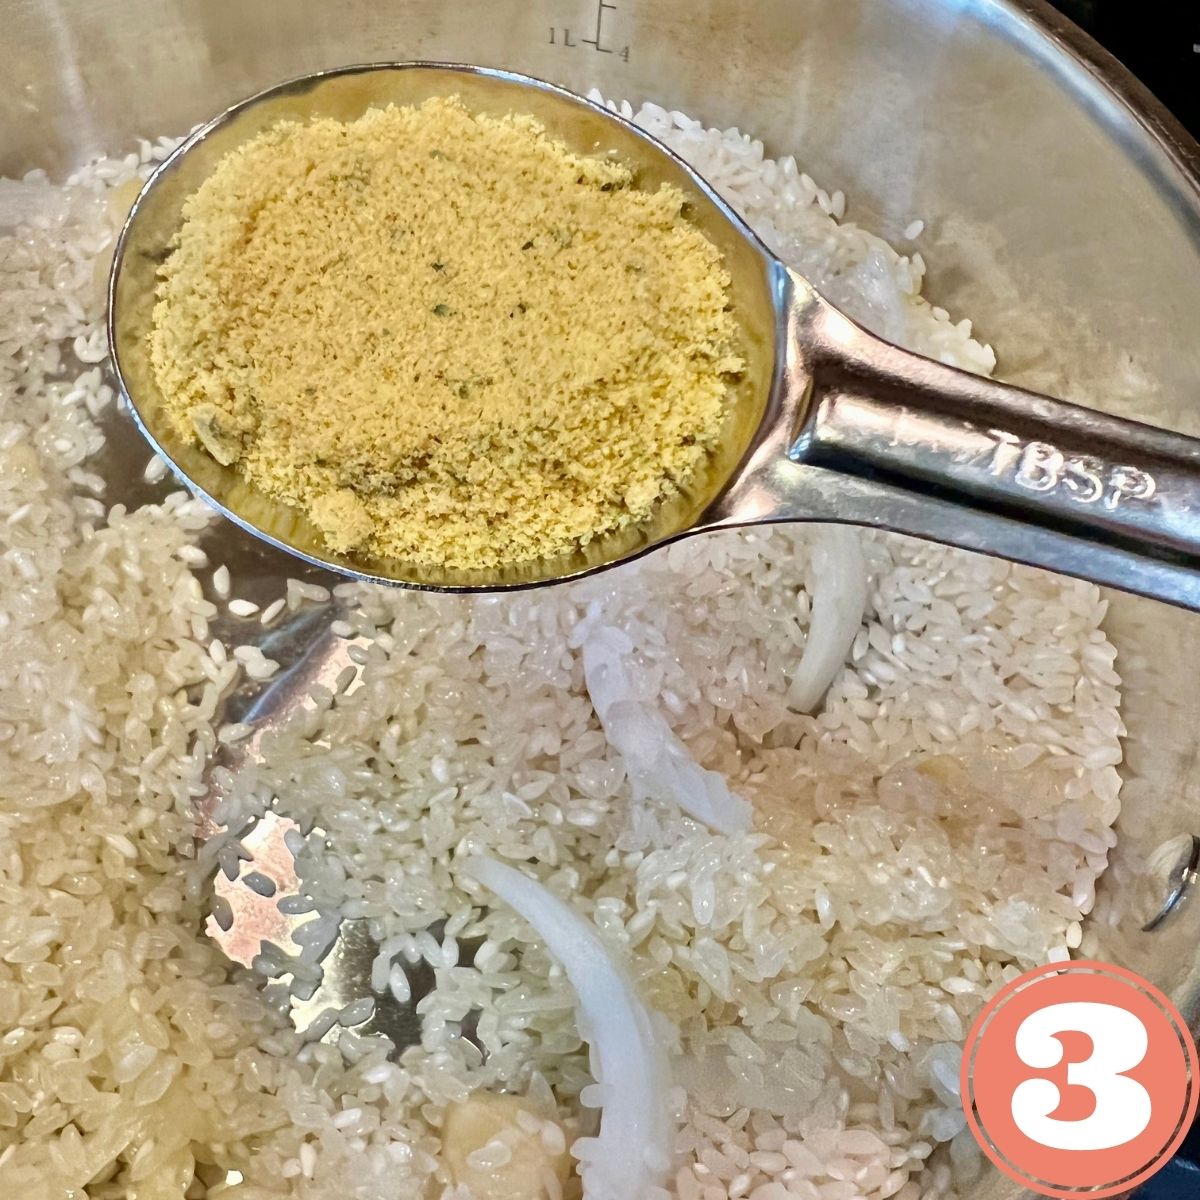 Adding one tablespoon of chicken bouillon powder to Mexican Red Rice in a frying pan